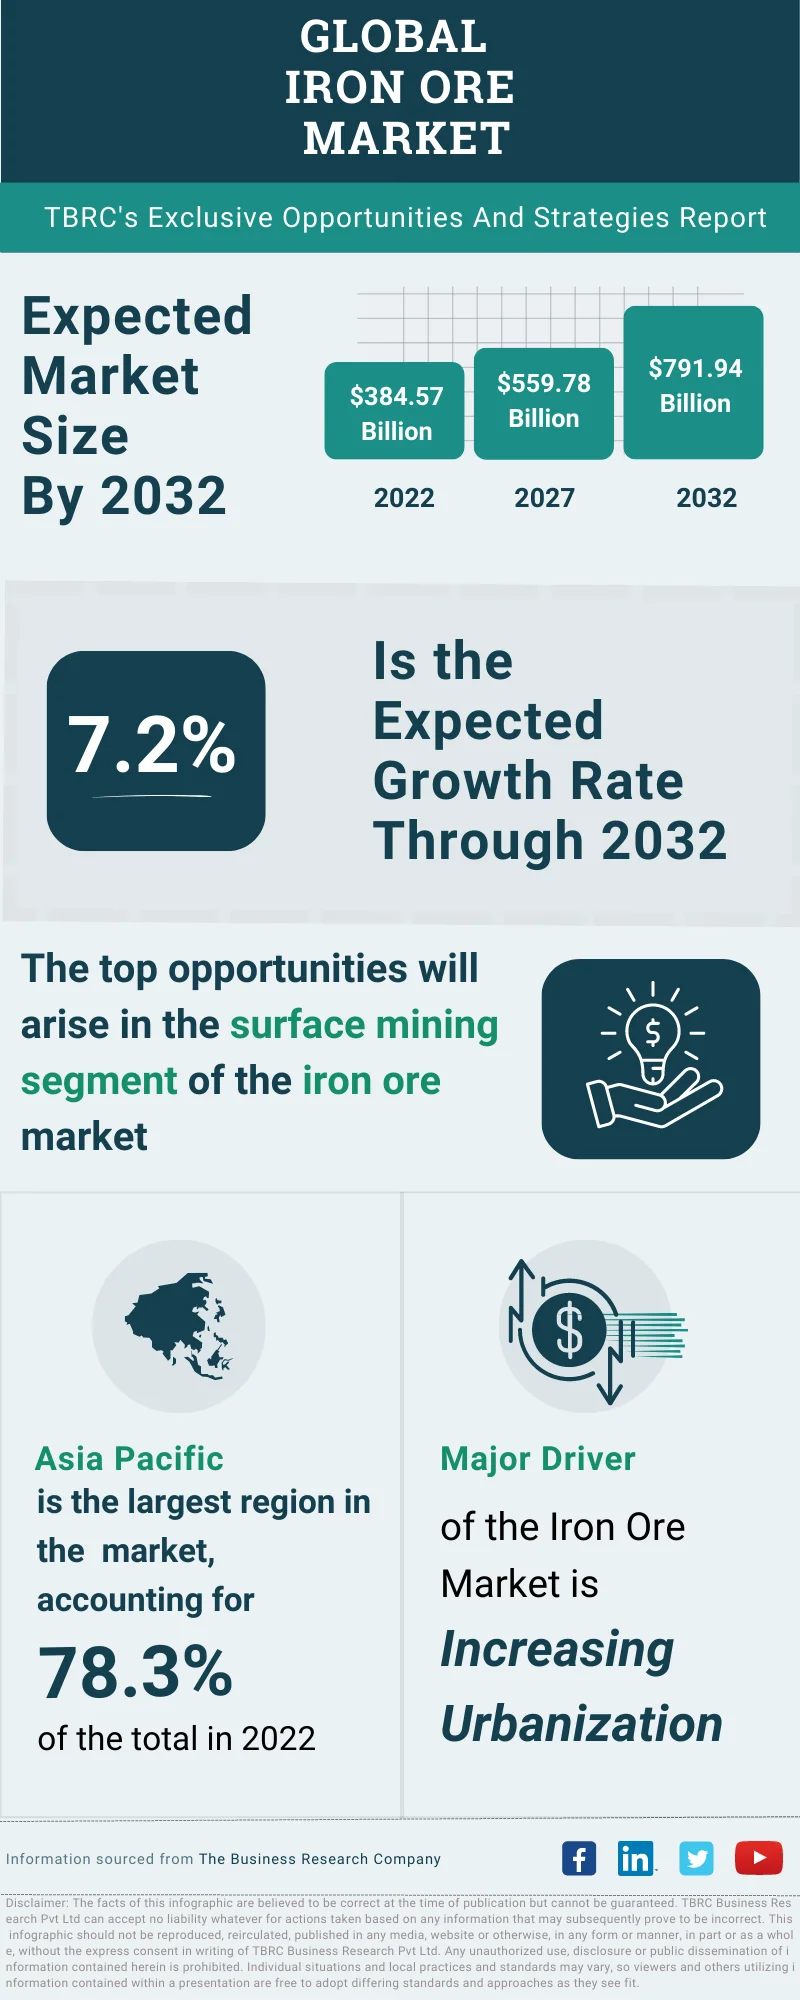 Iron Ore Global Market Opportunities And Strategies To 2032